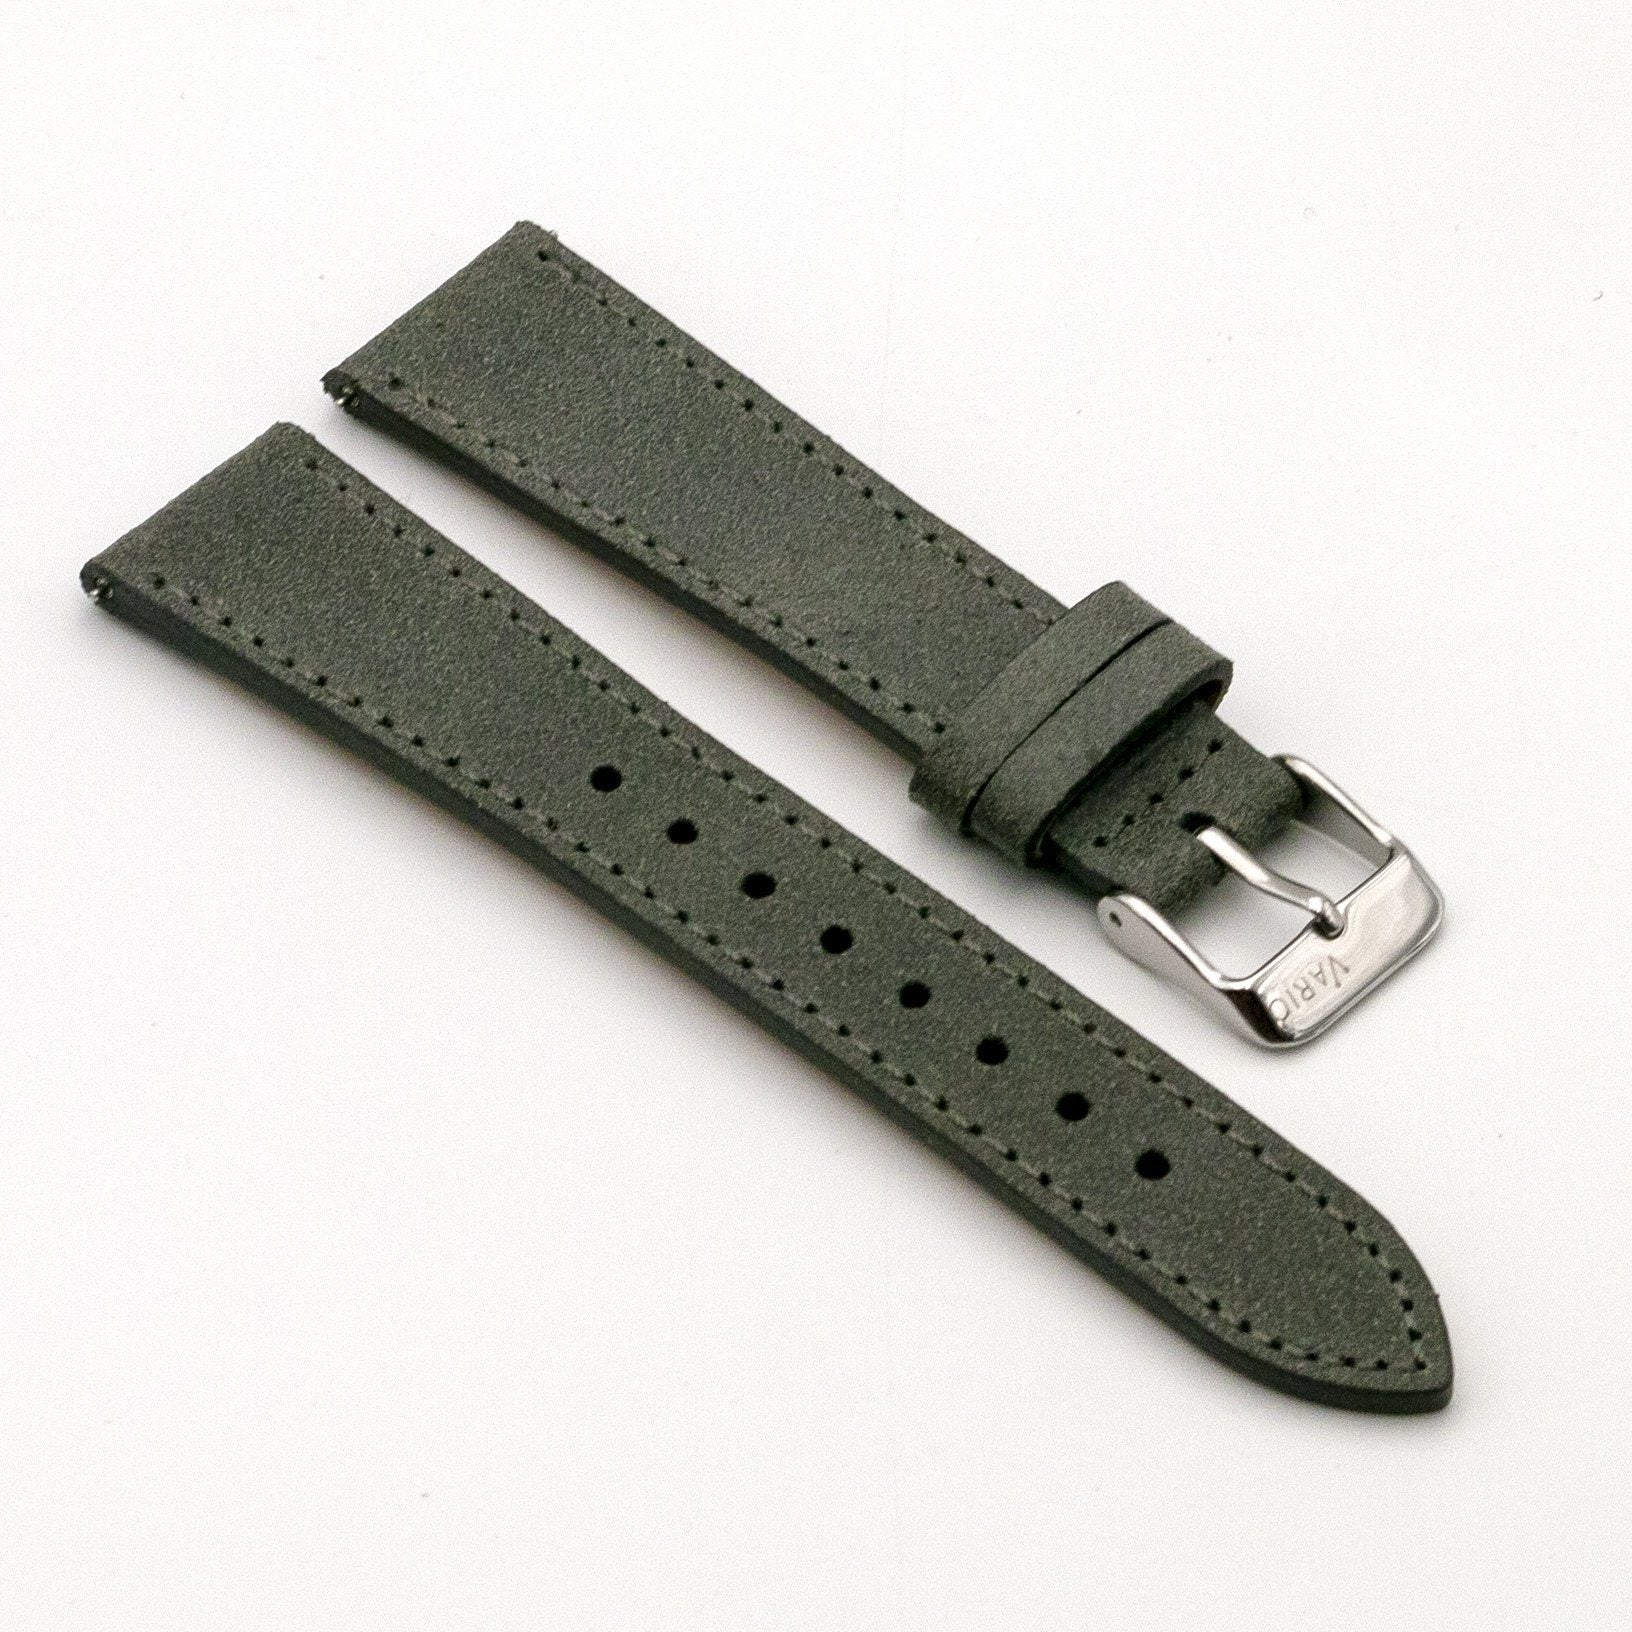 Vintage Distressed Italian Leather Pewter Grey Watch Strap with Quick Release